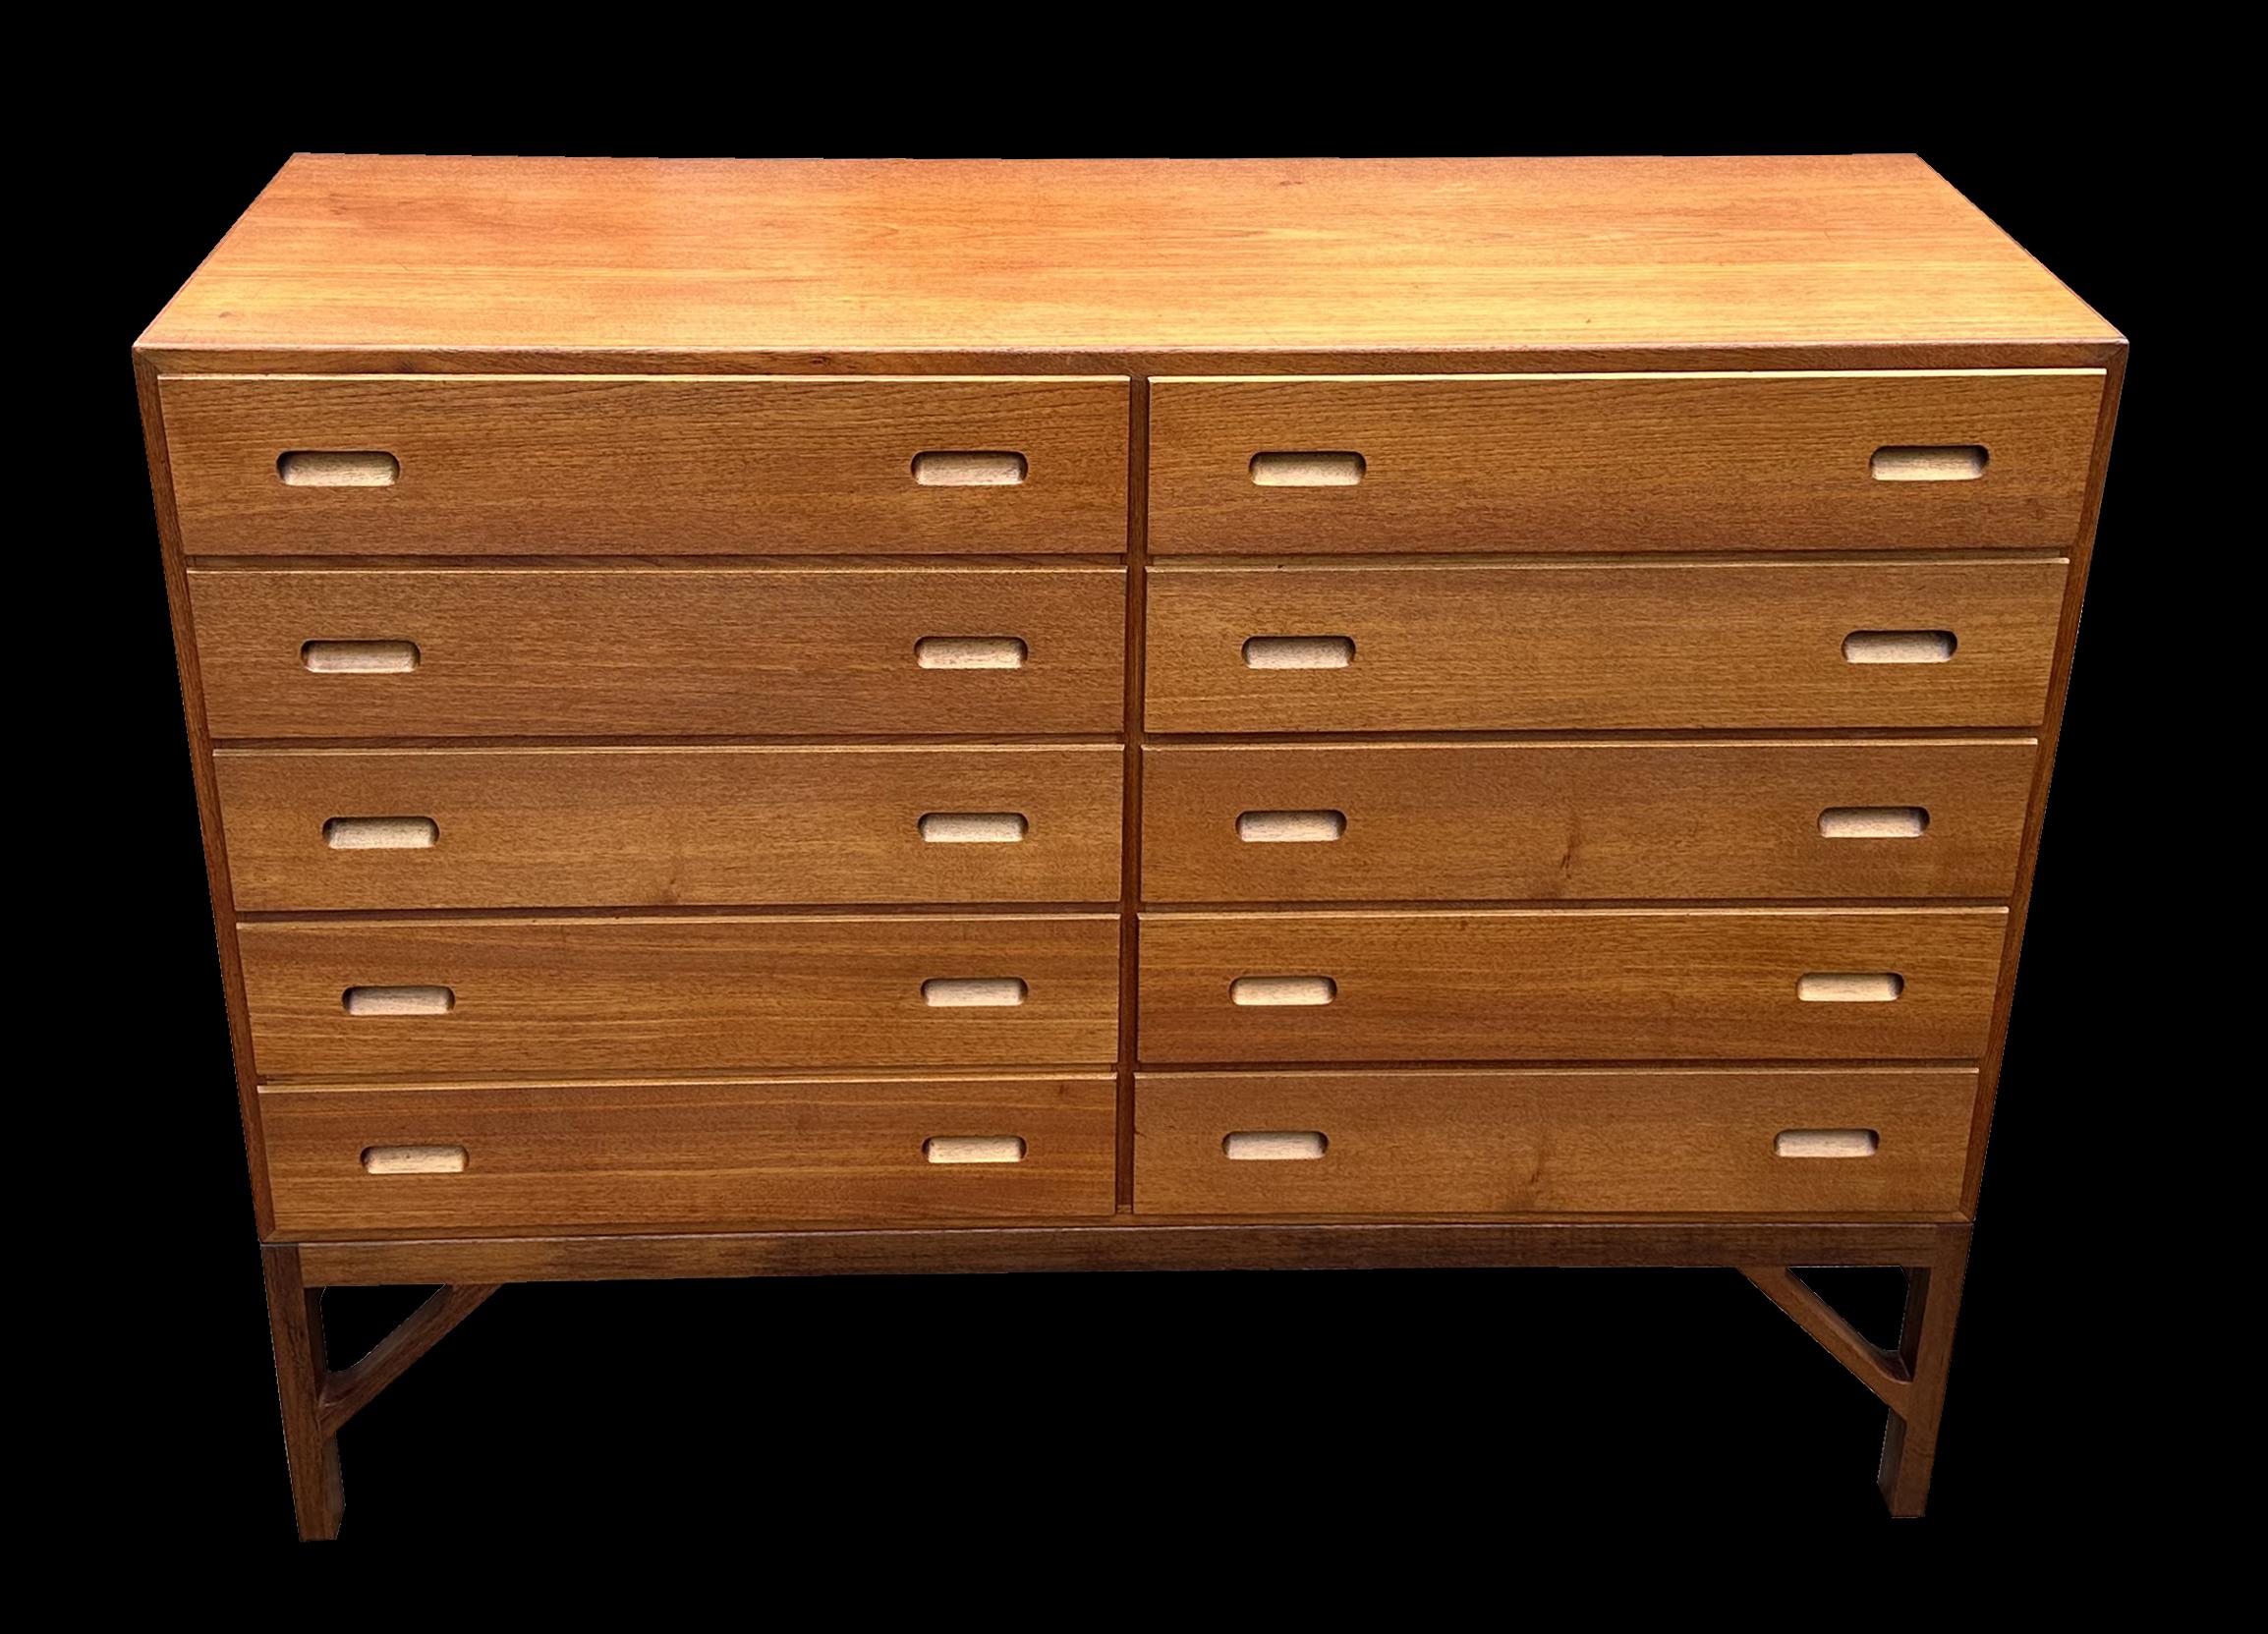 This Teak chest of 10 Drawers by Borge Mogensen is in very nice original condition.